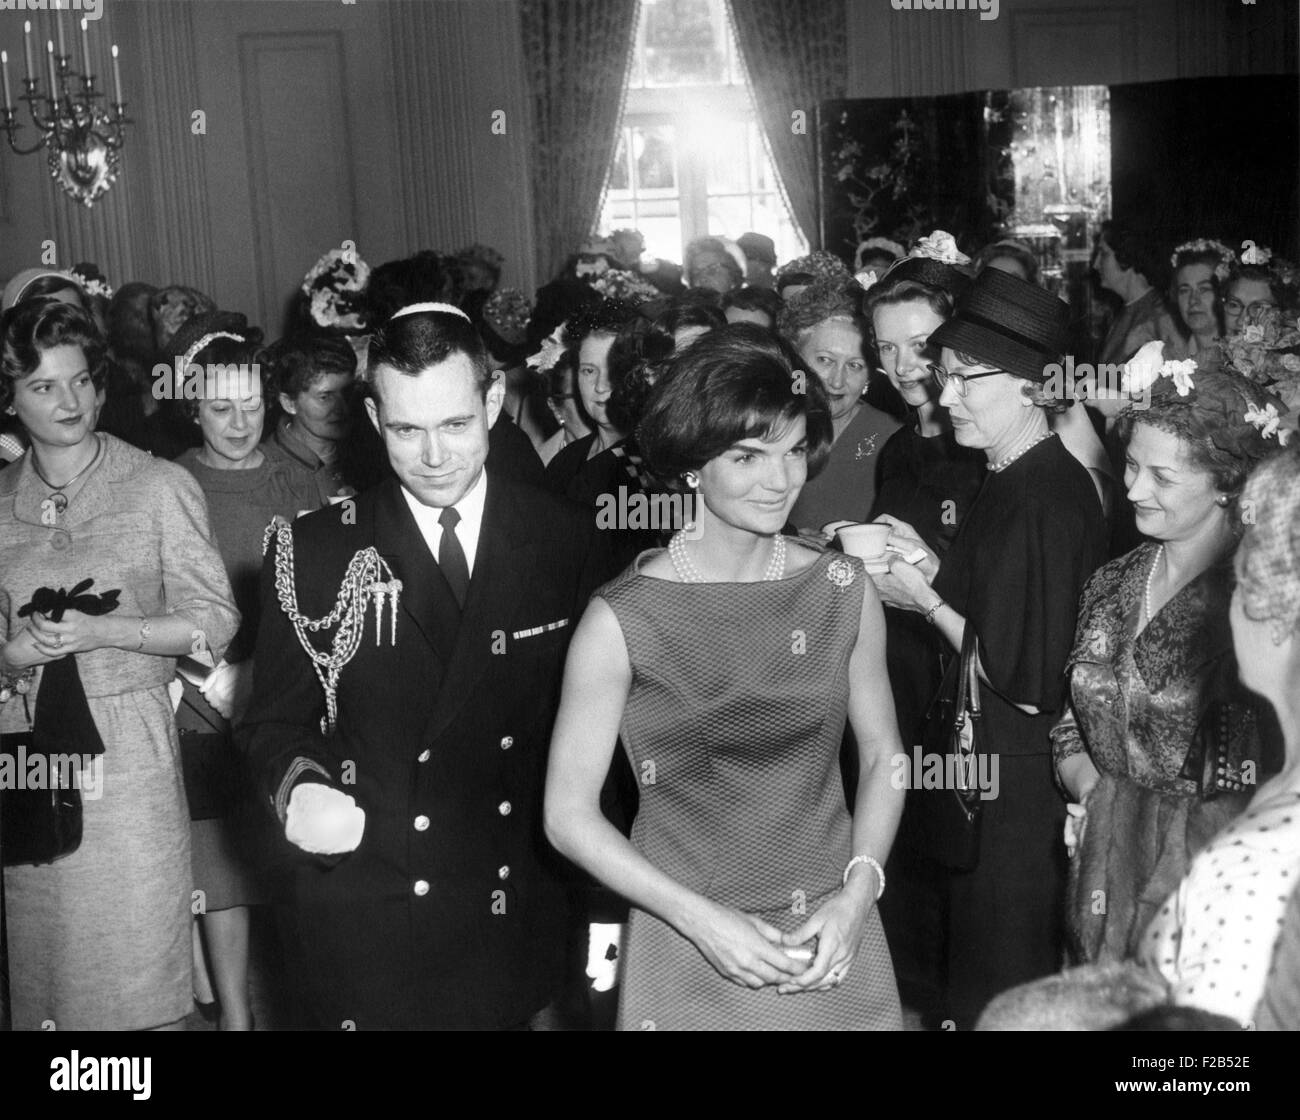 Jacqueline Kennedy at a reception for the wives of American Society of Newspaper Editors. April 19, 1961 in the Blue Room, White House. - (BSLOC 2015 1 129) Stock Photo